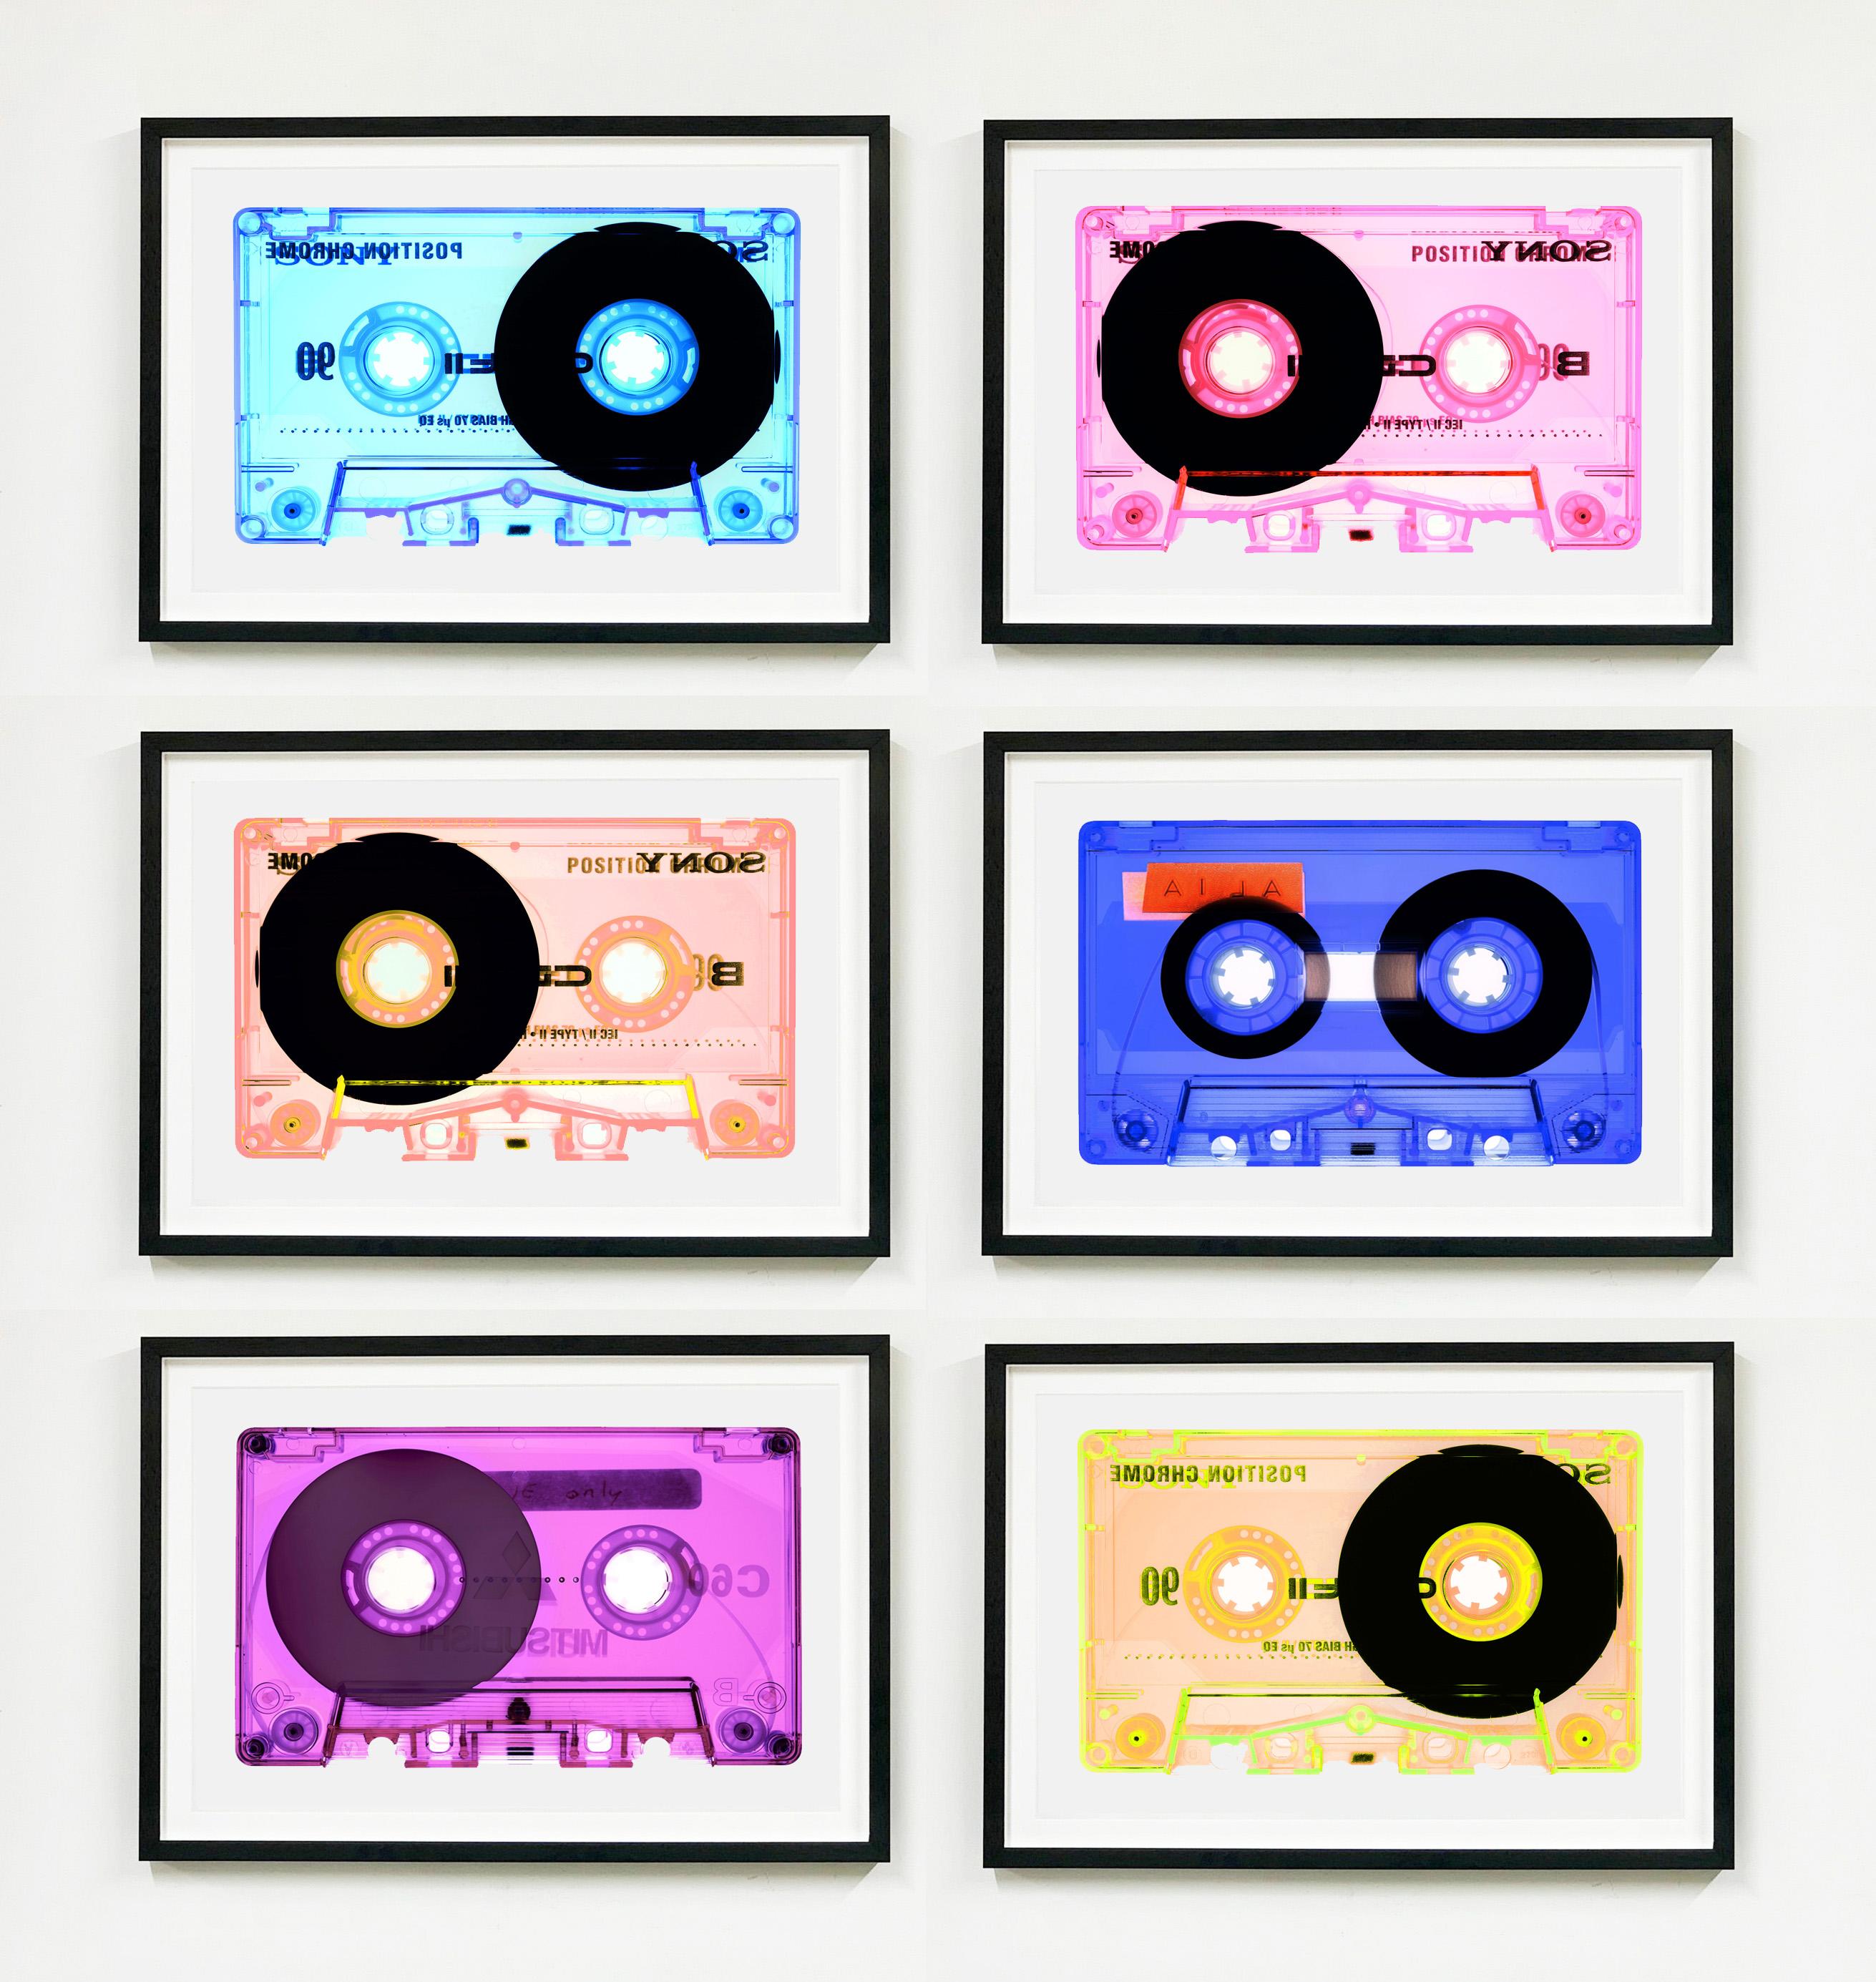 Tape Collection, AILA Blue - Contemporary Pop Art Color Photography For Sale 3